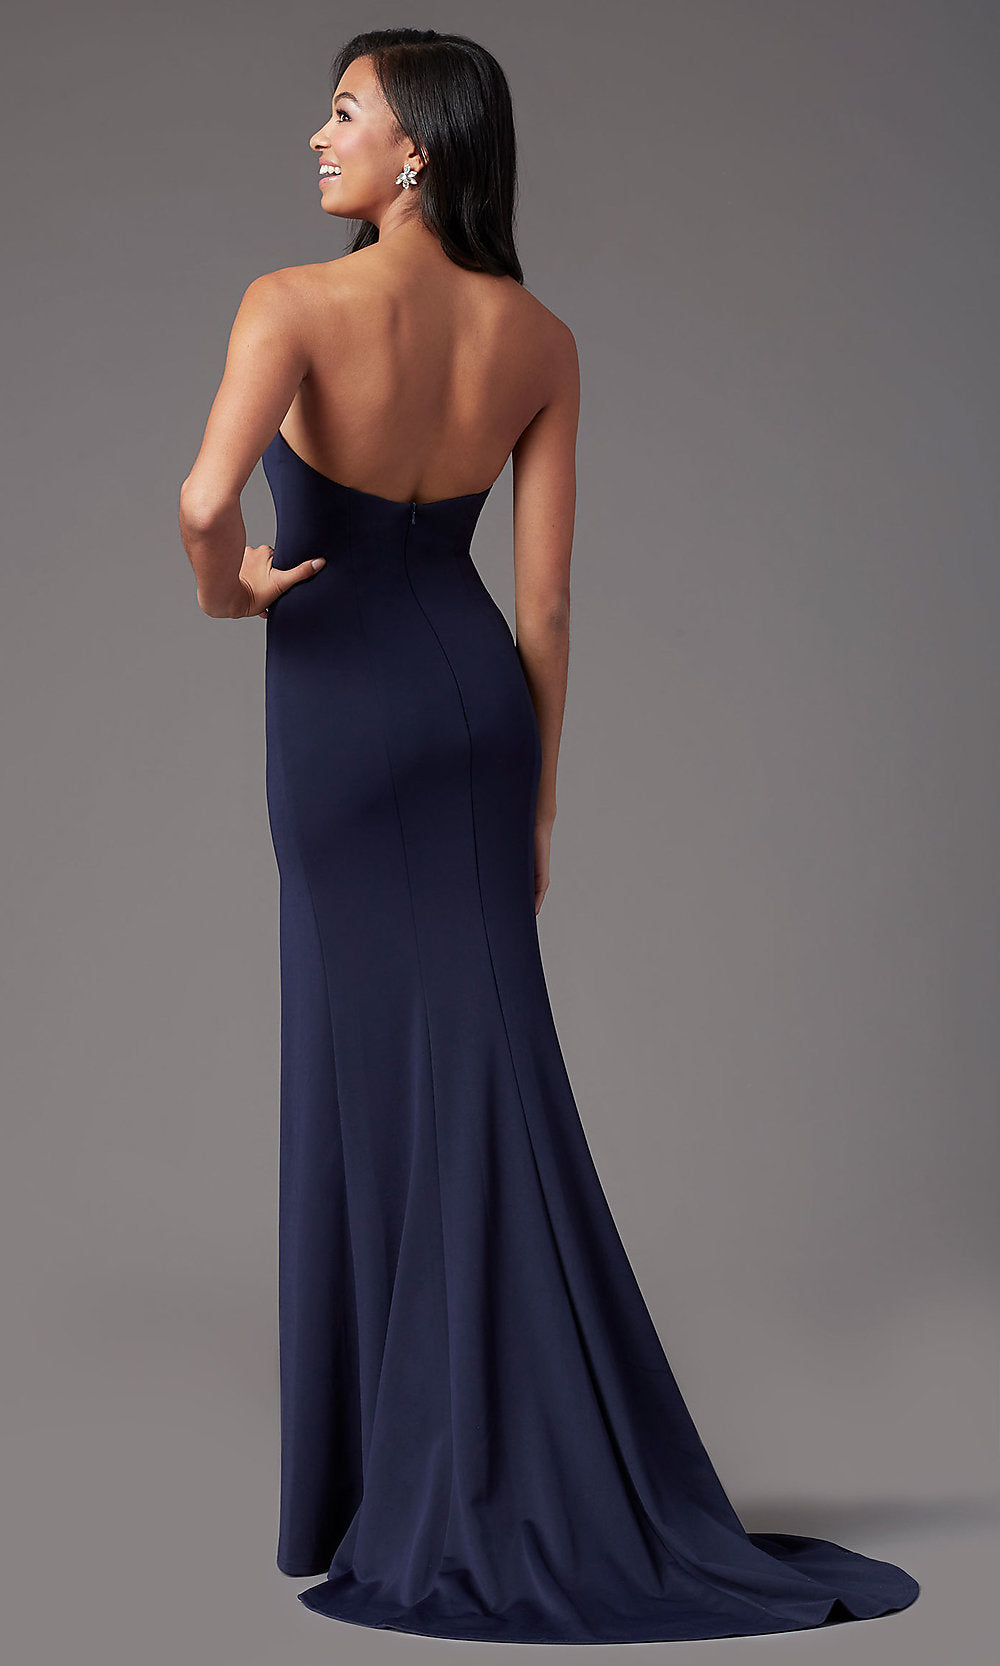  Long Sweetheart Strapless Prom Dress by PromGirl